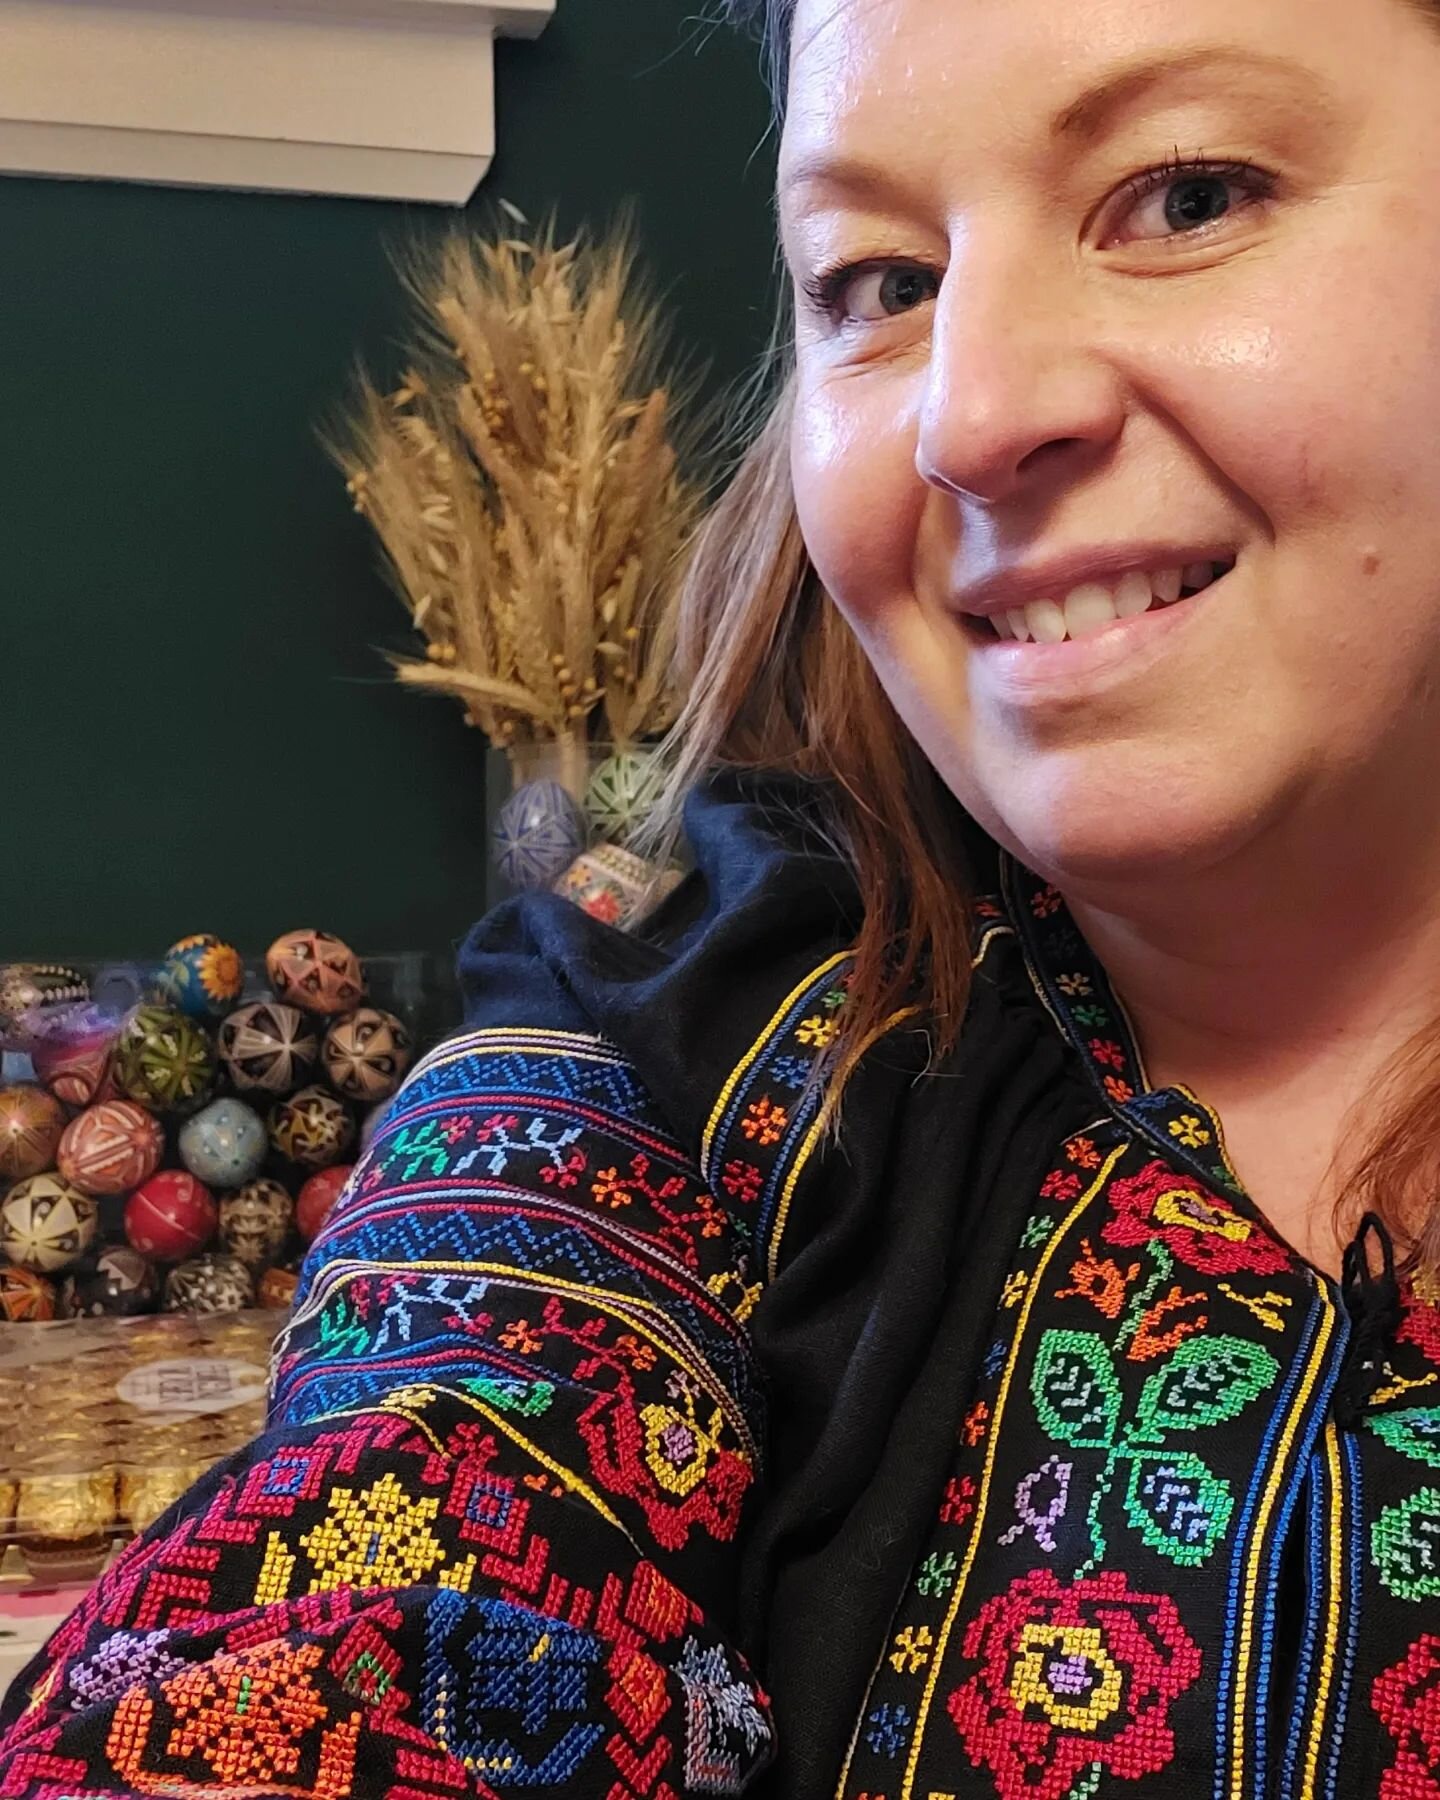 Meet the maker!
Hey! I'm Tanya, a pysankarka from Toronto 🇨🇦. I'm second-generation Ukrainian-Canadian and have been writing pysanky over 40 years, since before I could write words. Like most of my friends, I grew up surrounded by all things Ukrain